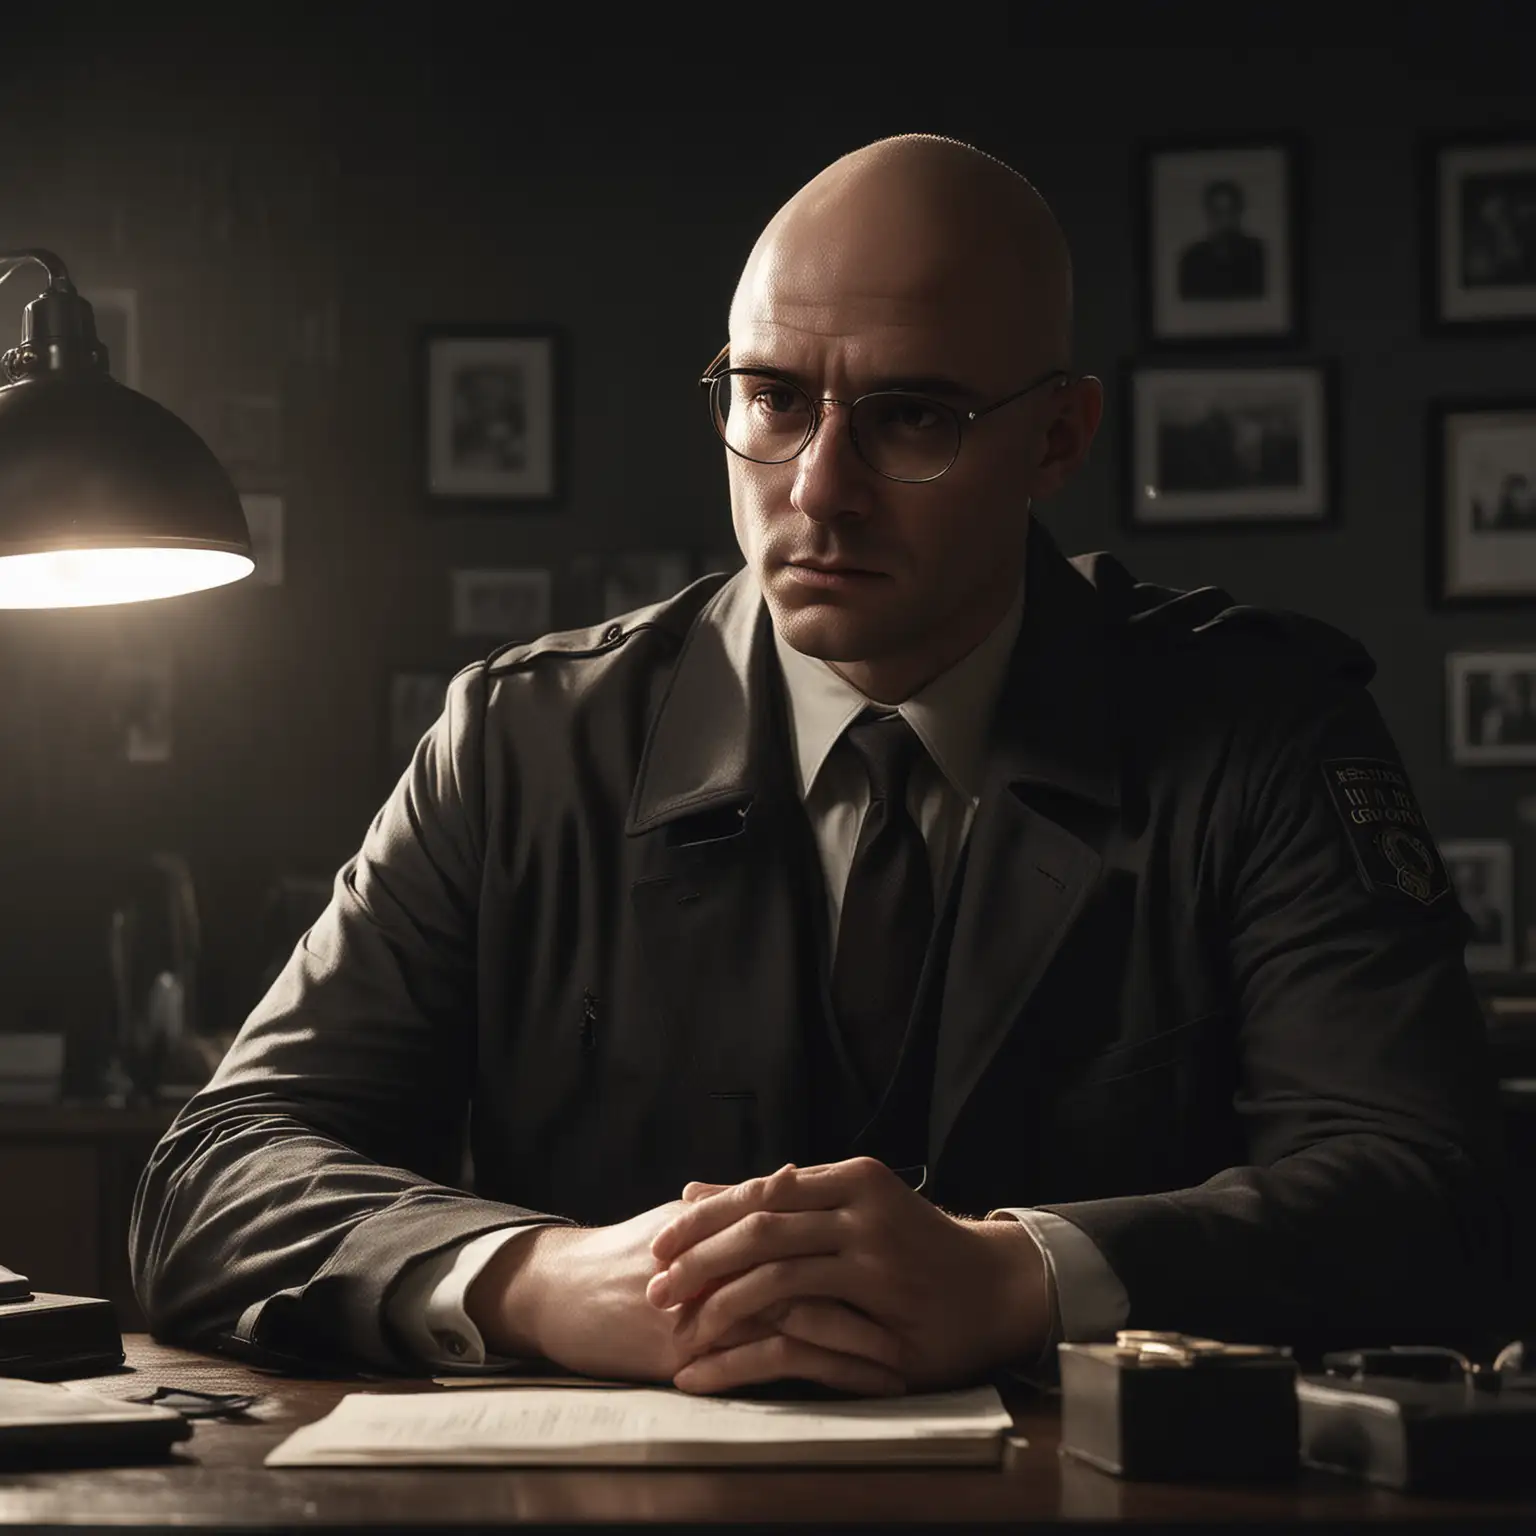 Bald Male Detective in Dimly Lit Office Setting